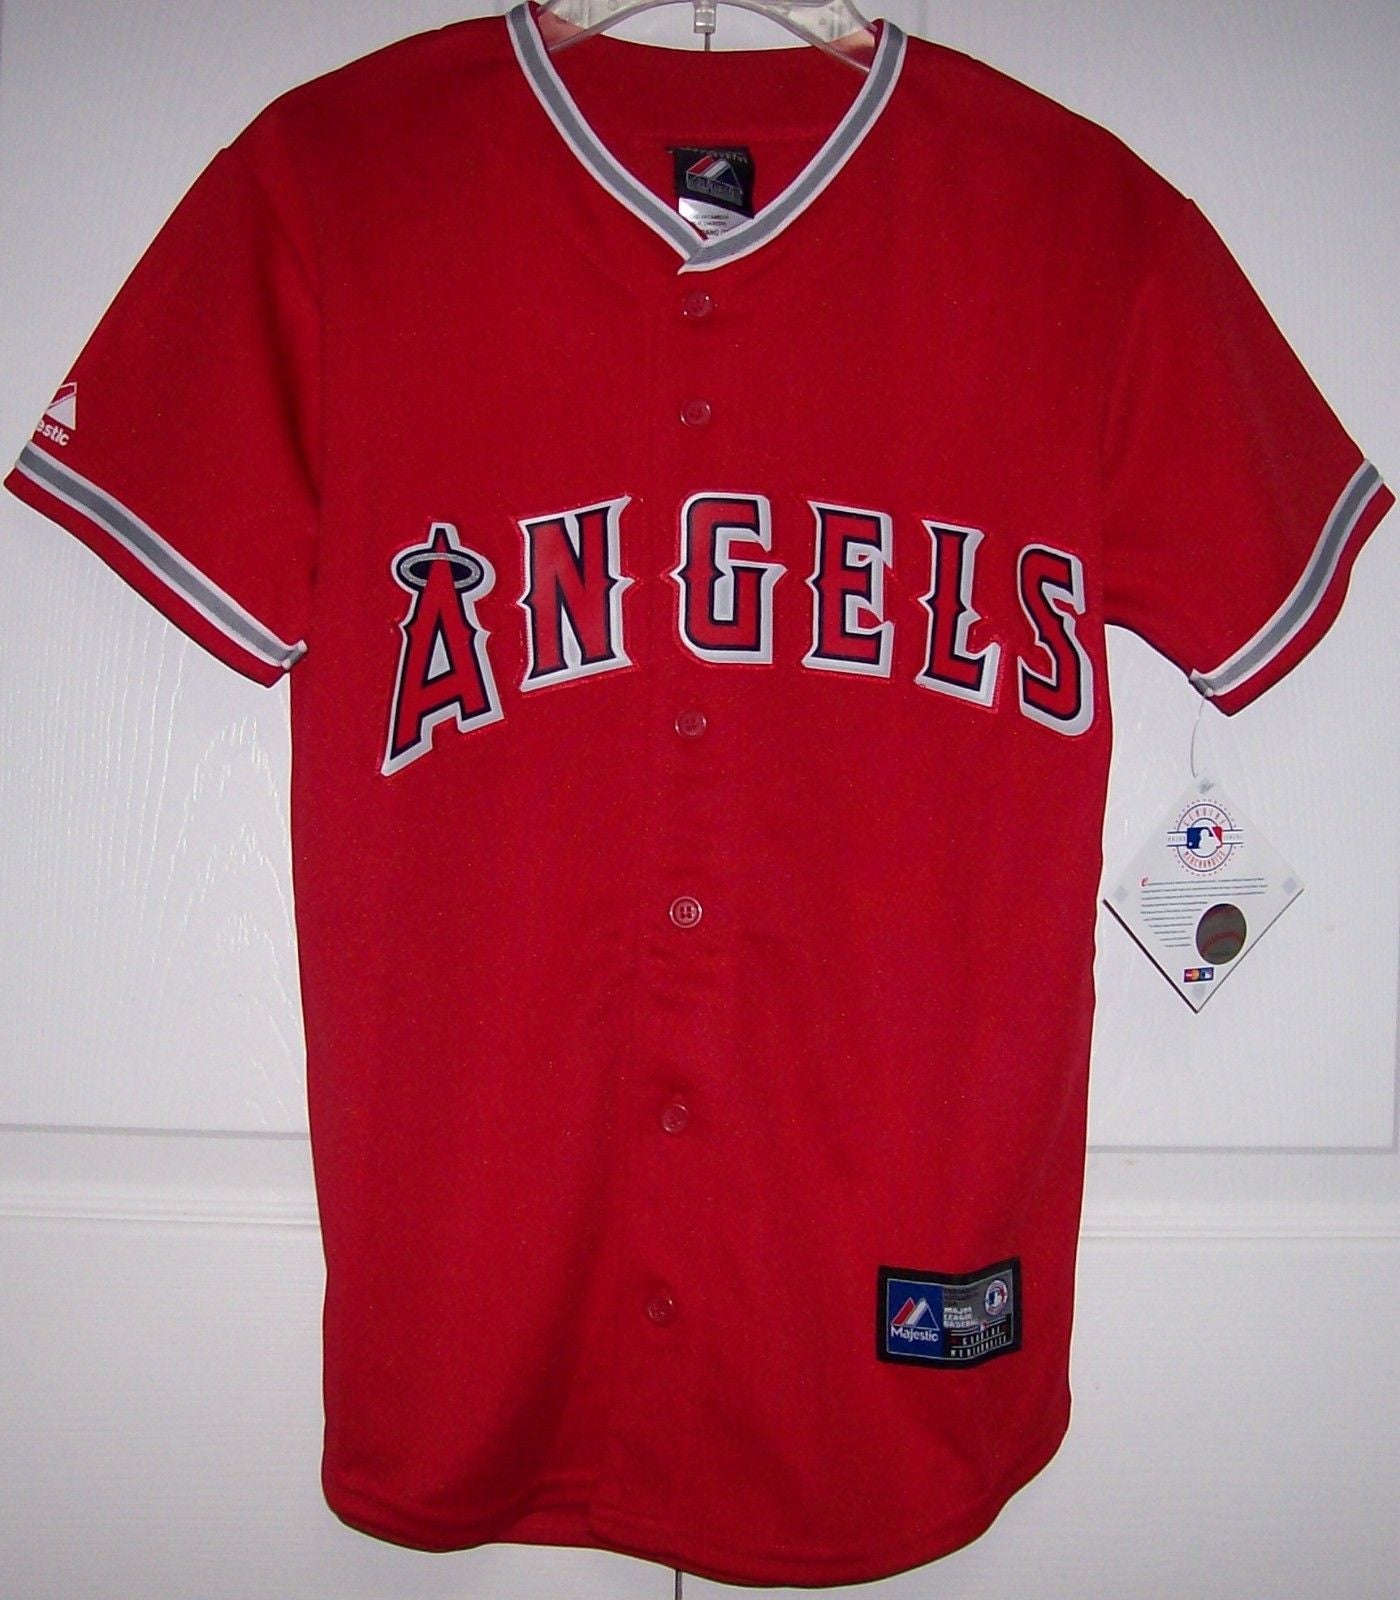 TROUT Los Angeles Angels Toddler Majestic MLB Baseball jersey RED Alternate